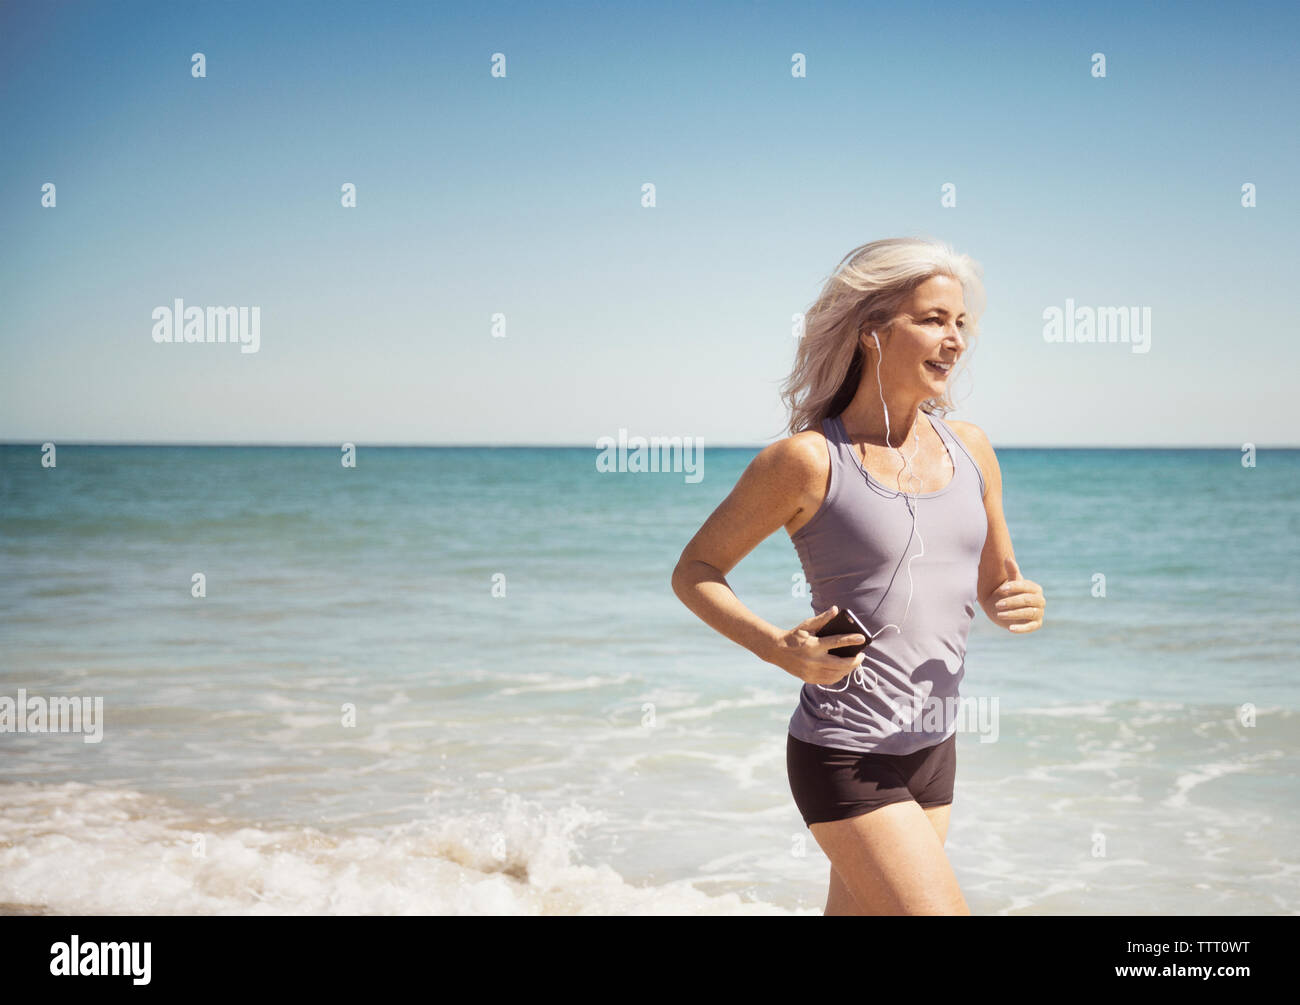 Full length of fit woman running on sea shore at Delray beach Stock Photo